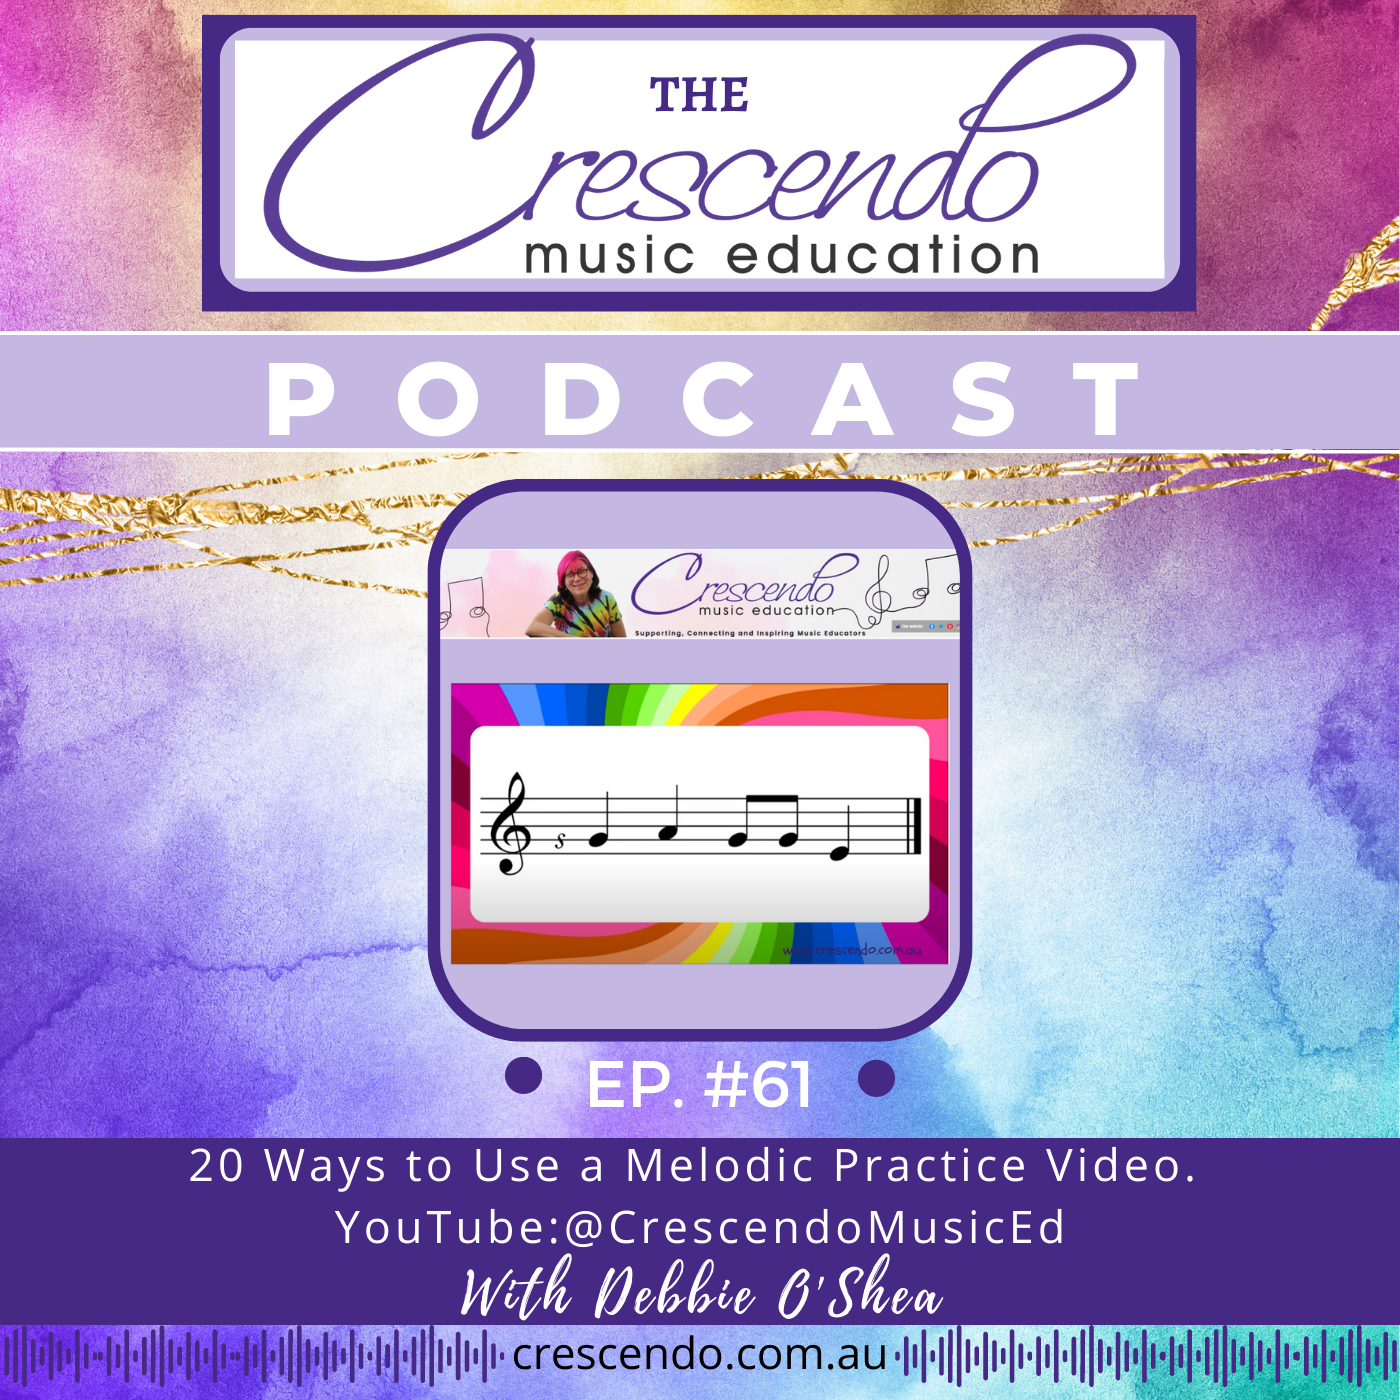 Today, we present to you an exciting resource that can revolutionize the way your students connect with music...the Melodic Practice Video.